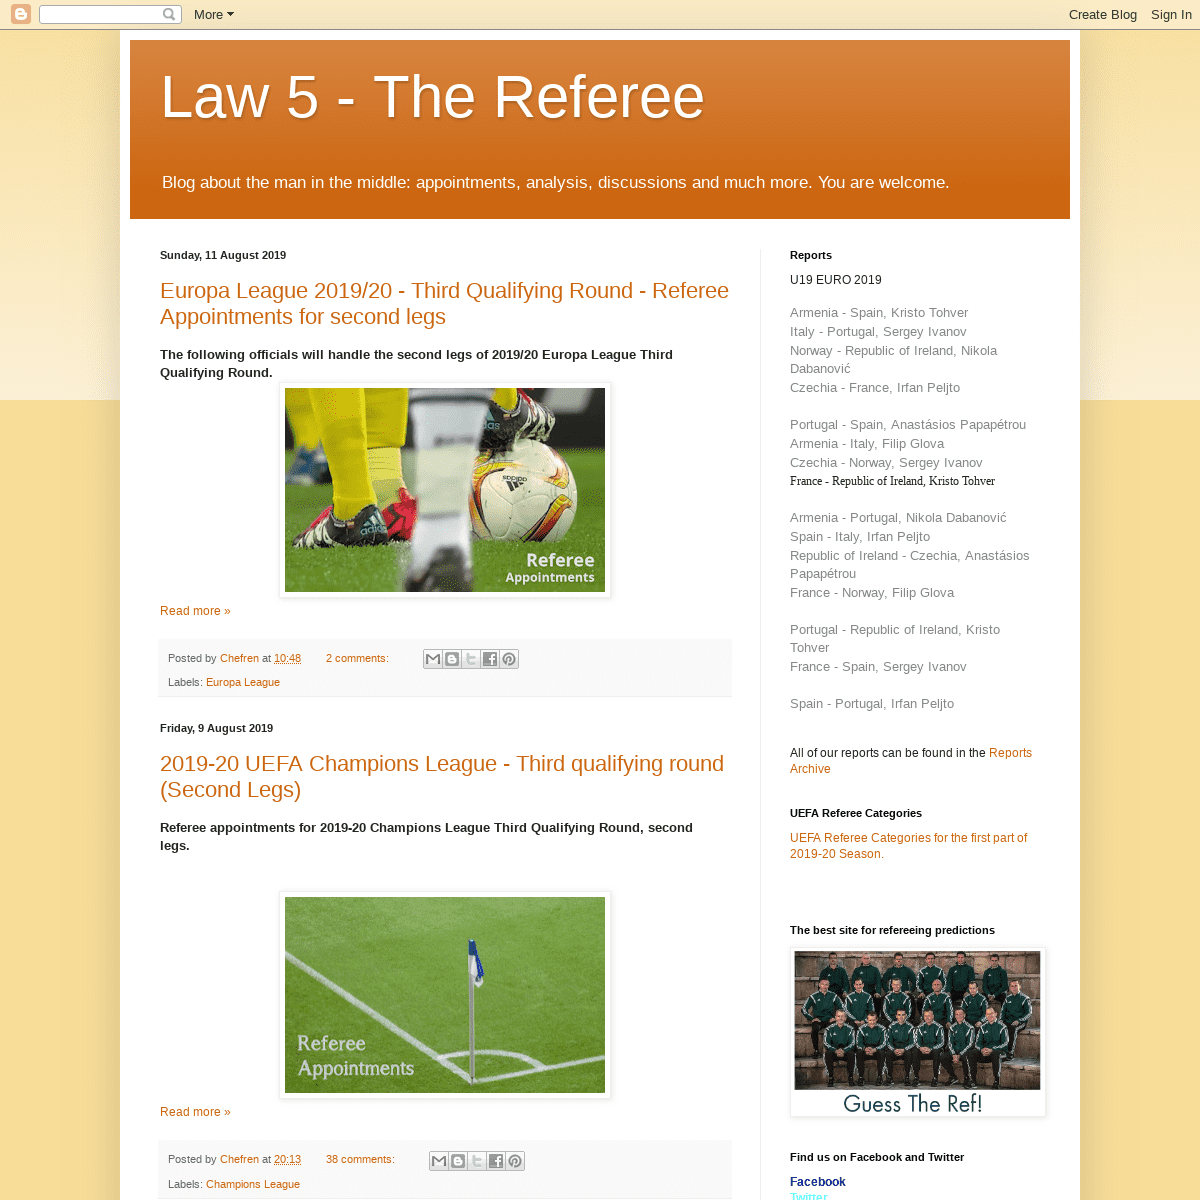 Law 5 - The Referee